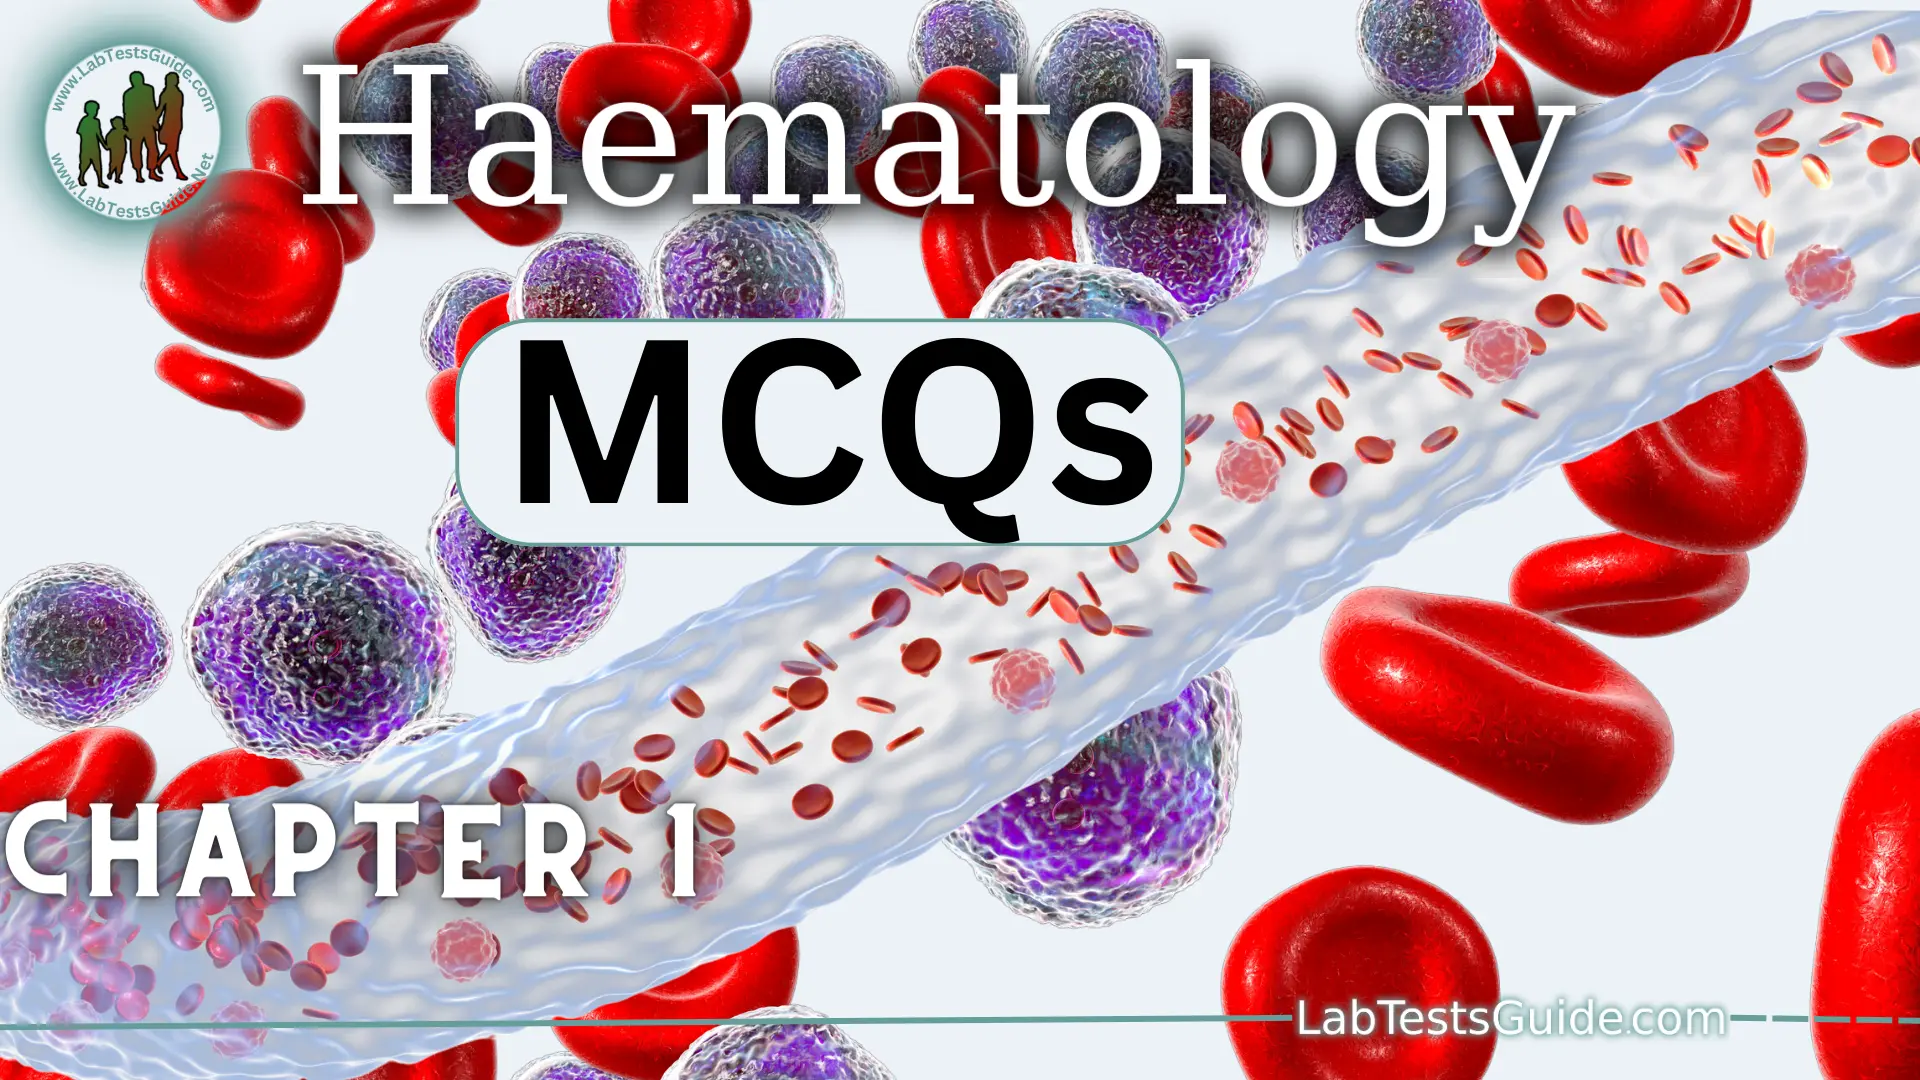 Haematology MCQs and FAQs Chapter 1